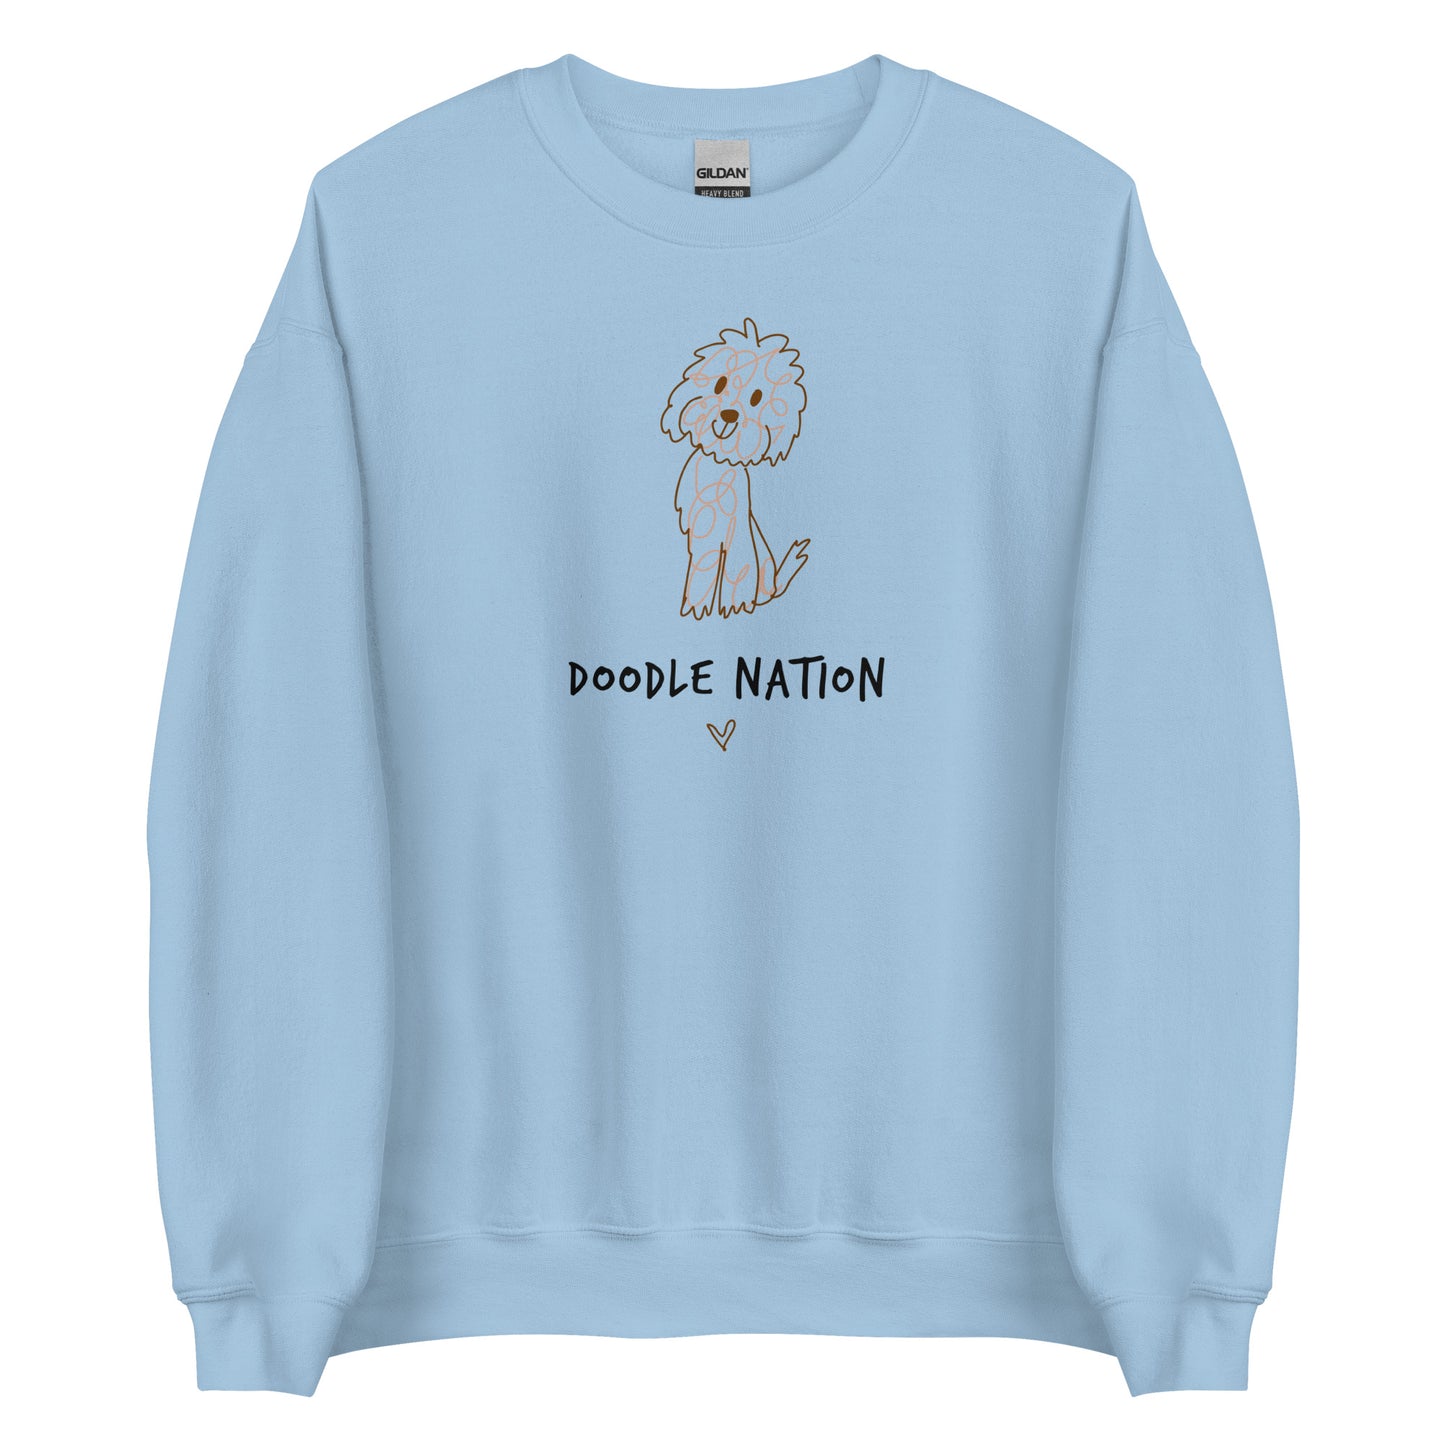 Light blue crew neck sweatshirt with hand drawn dog design and saying Doodle Nation